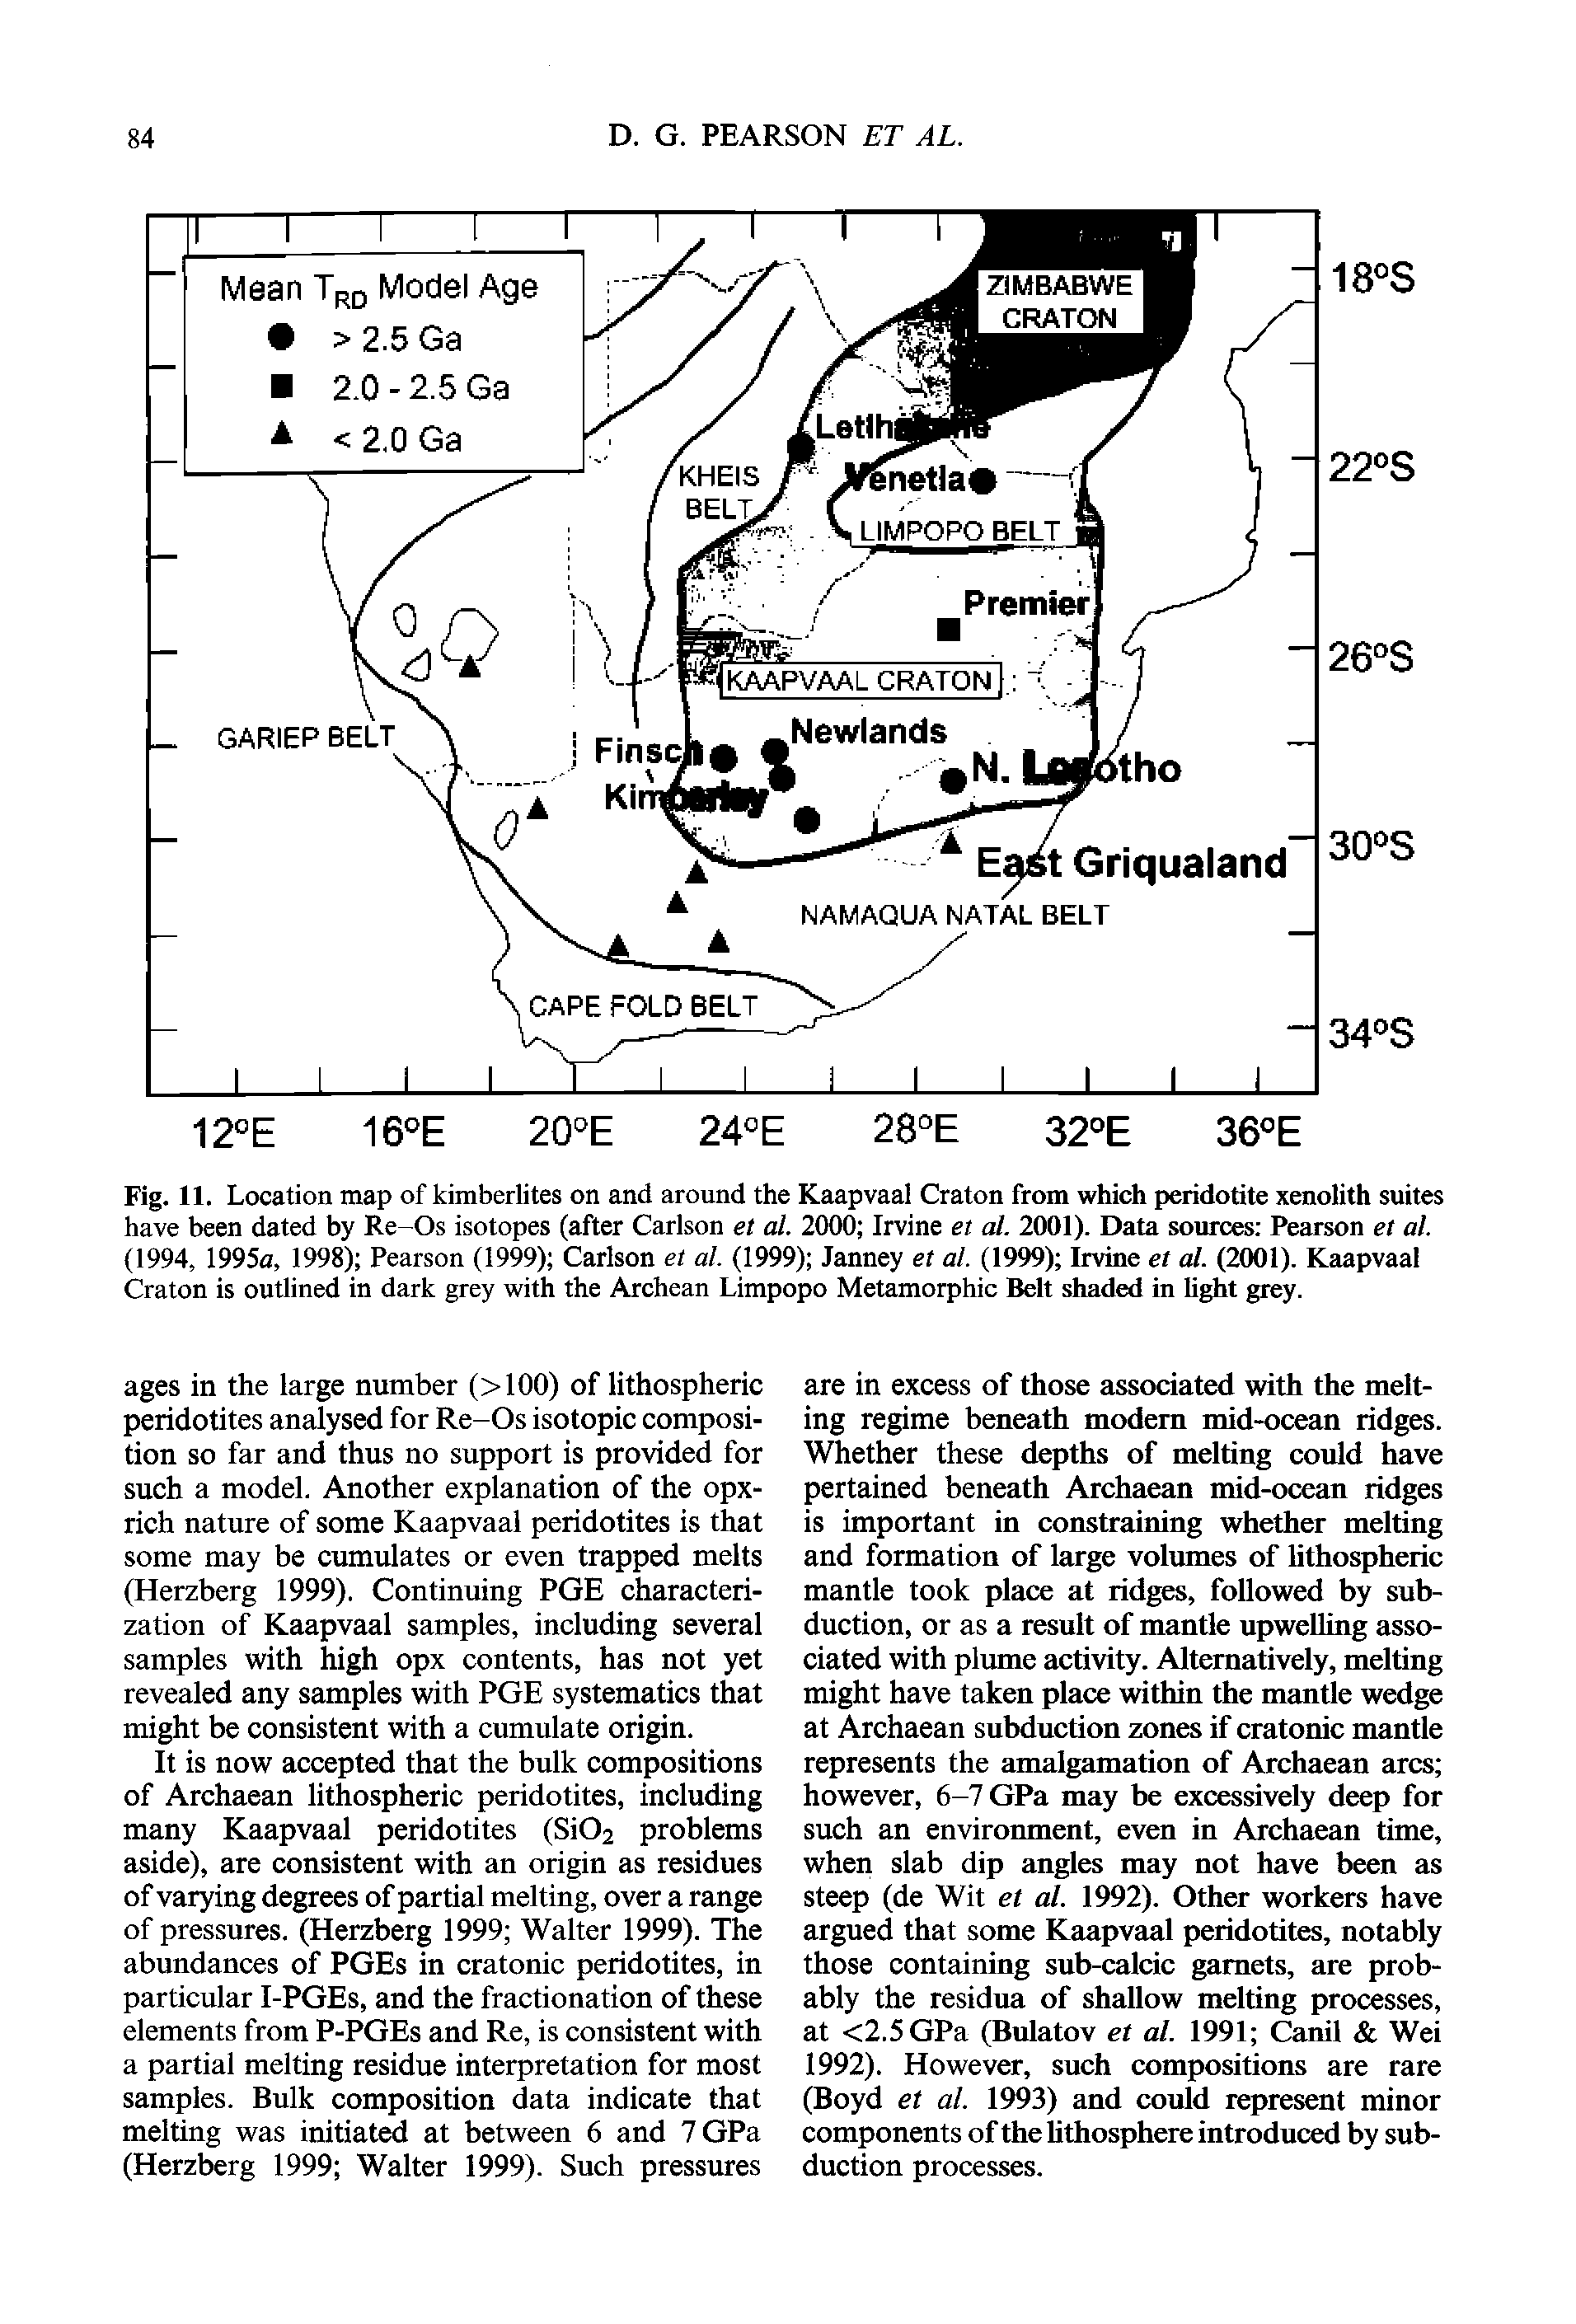 Fig. 11. Location map of kimberlites on and around the Kaapvaal Craton from which peridotite xenolith suites have been dated by Re-Os isotopes (after Carlson et al. 2000 Irvine et al. 2001). Data sources Pearson et al. (1994, 1995a, 1998) Pearson (1999) Carlson et al. (1999) Janney et al. (1999) Irvine et al. (2001). Kaapvaal Craton is outlined in dark grey with the Archean Limpopo Metamorphic Belt shaded in light grey.